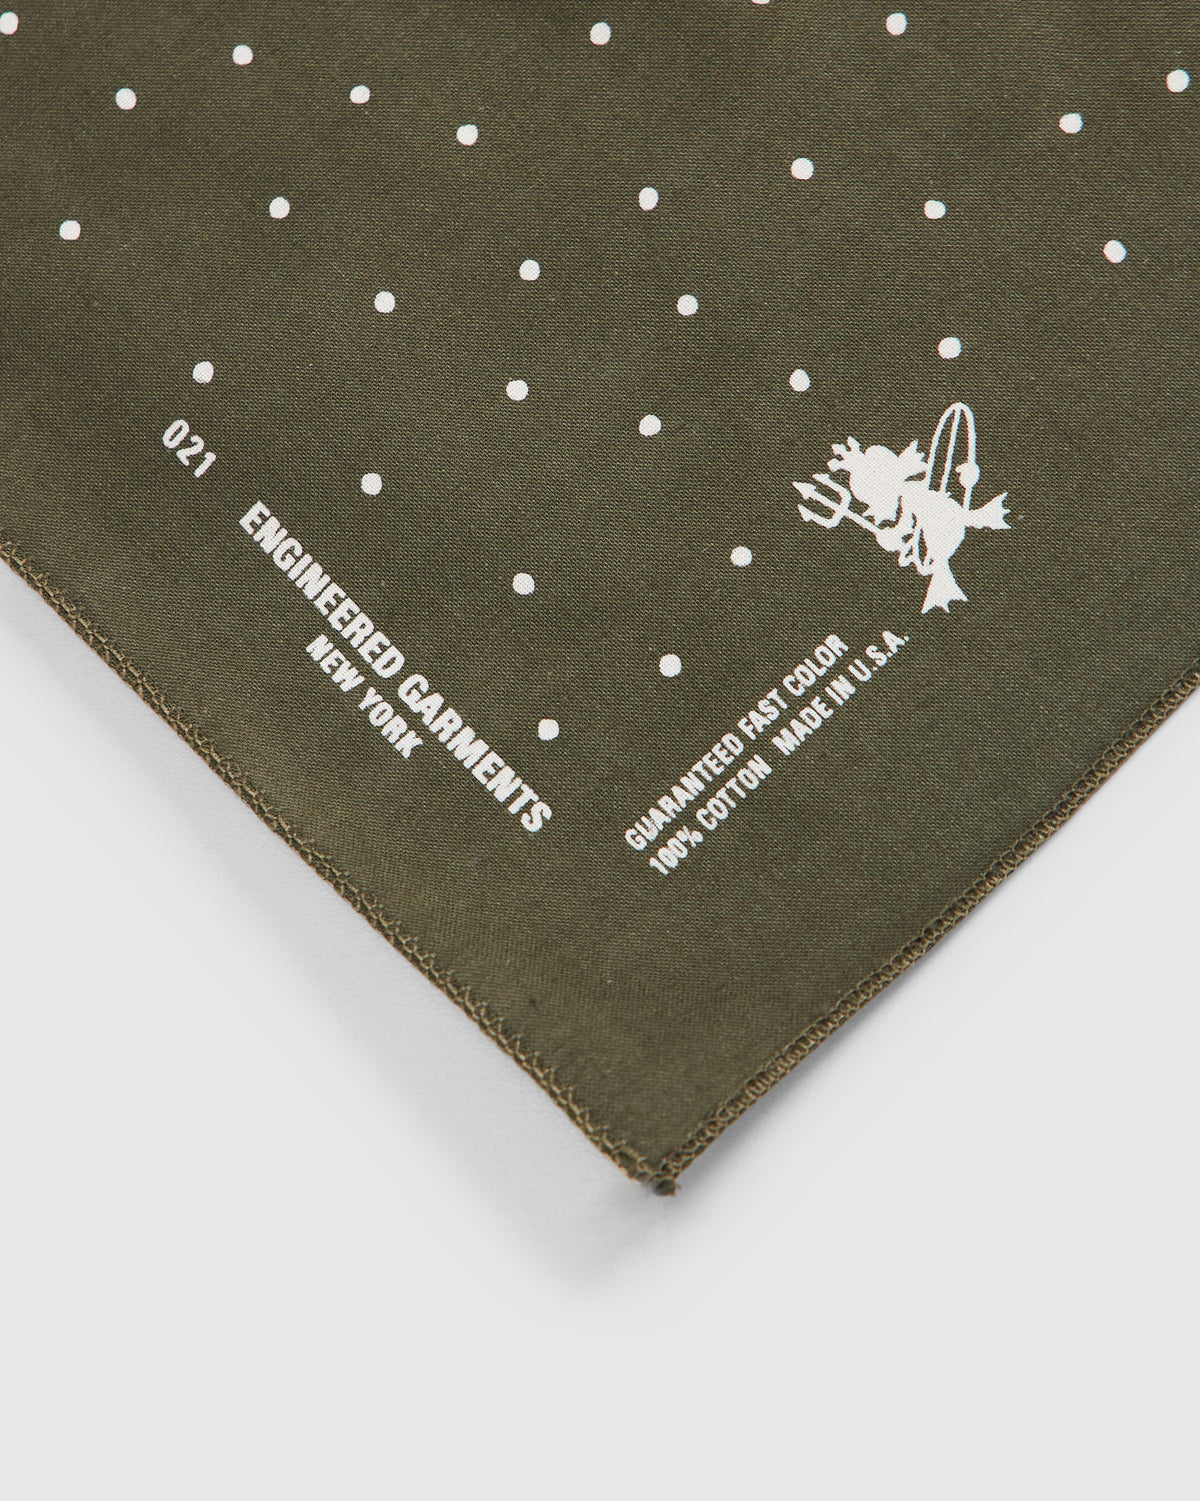 Printed Bandana in Olive Collage